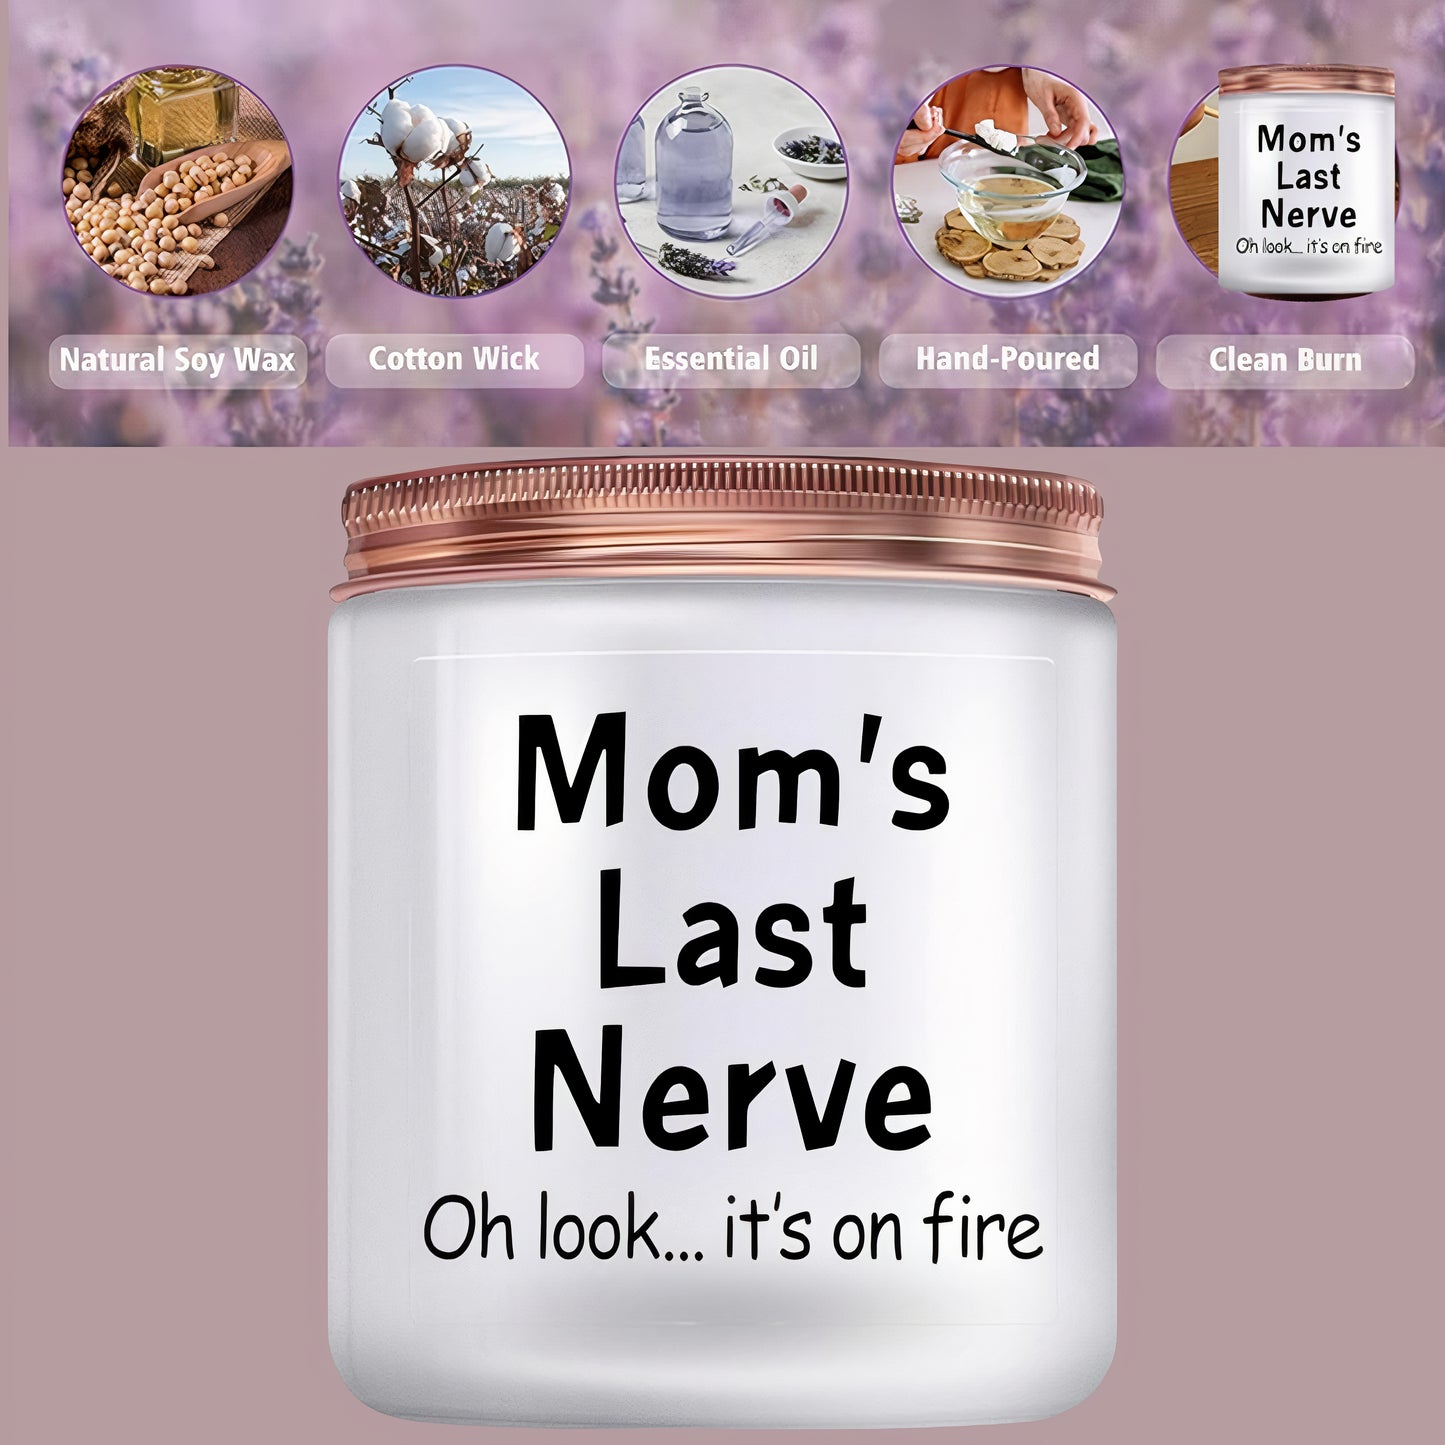 "Mom Last Nerve" Candles - 9oz Vanilla Scented Soy Wax Candle